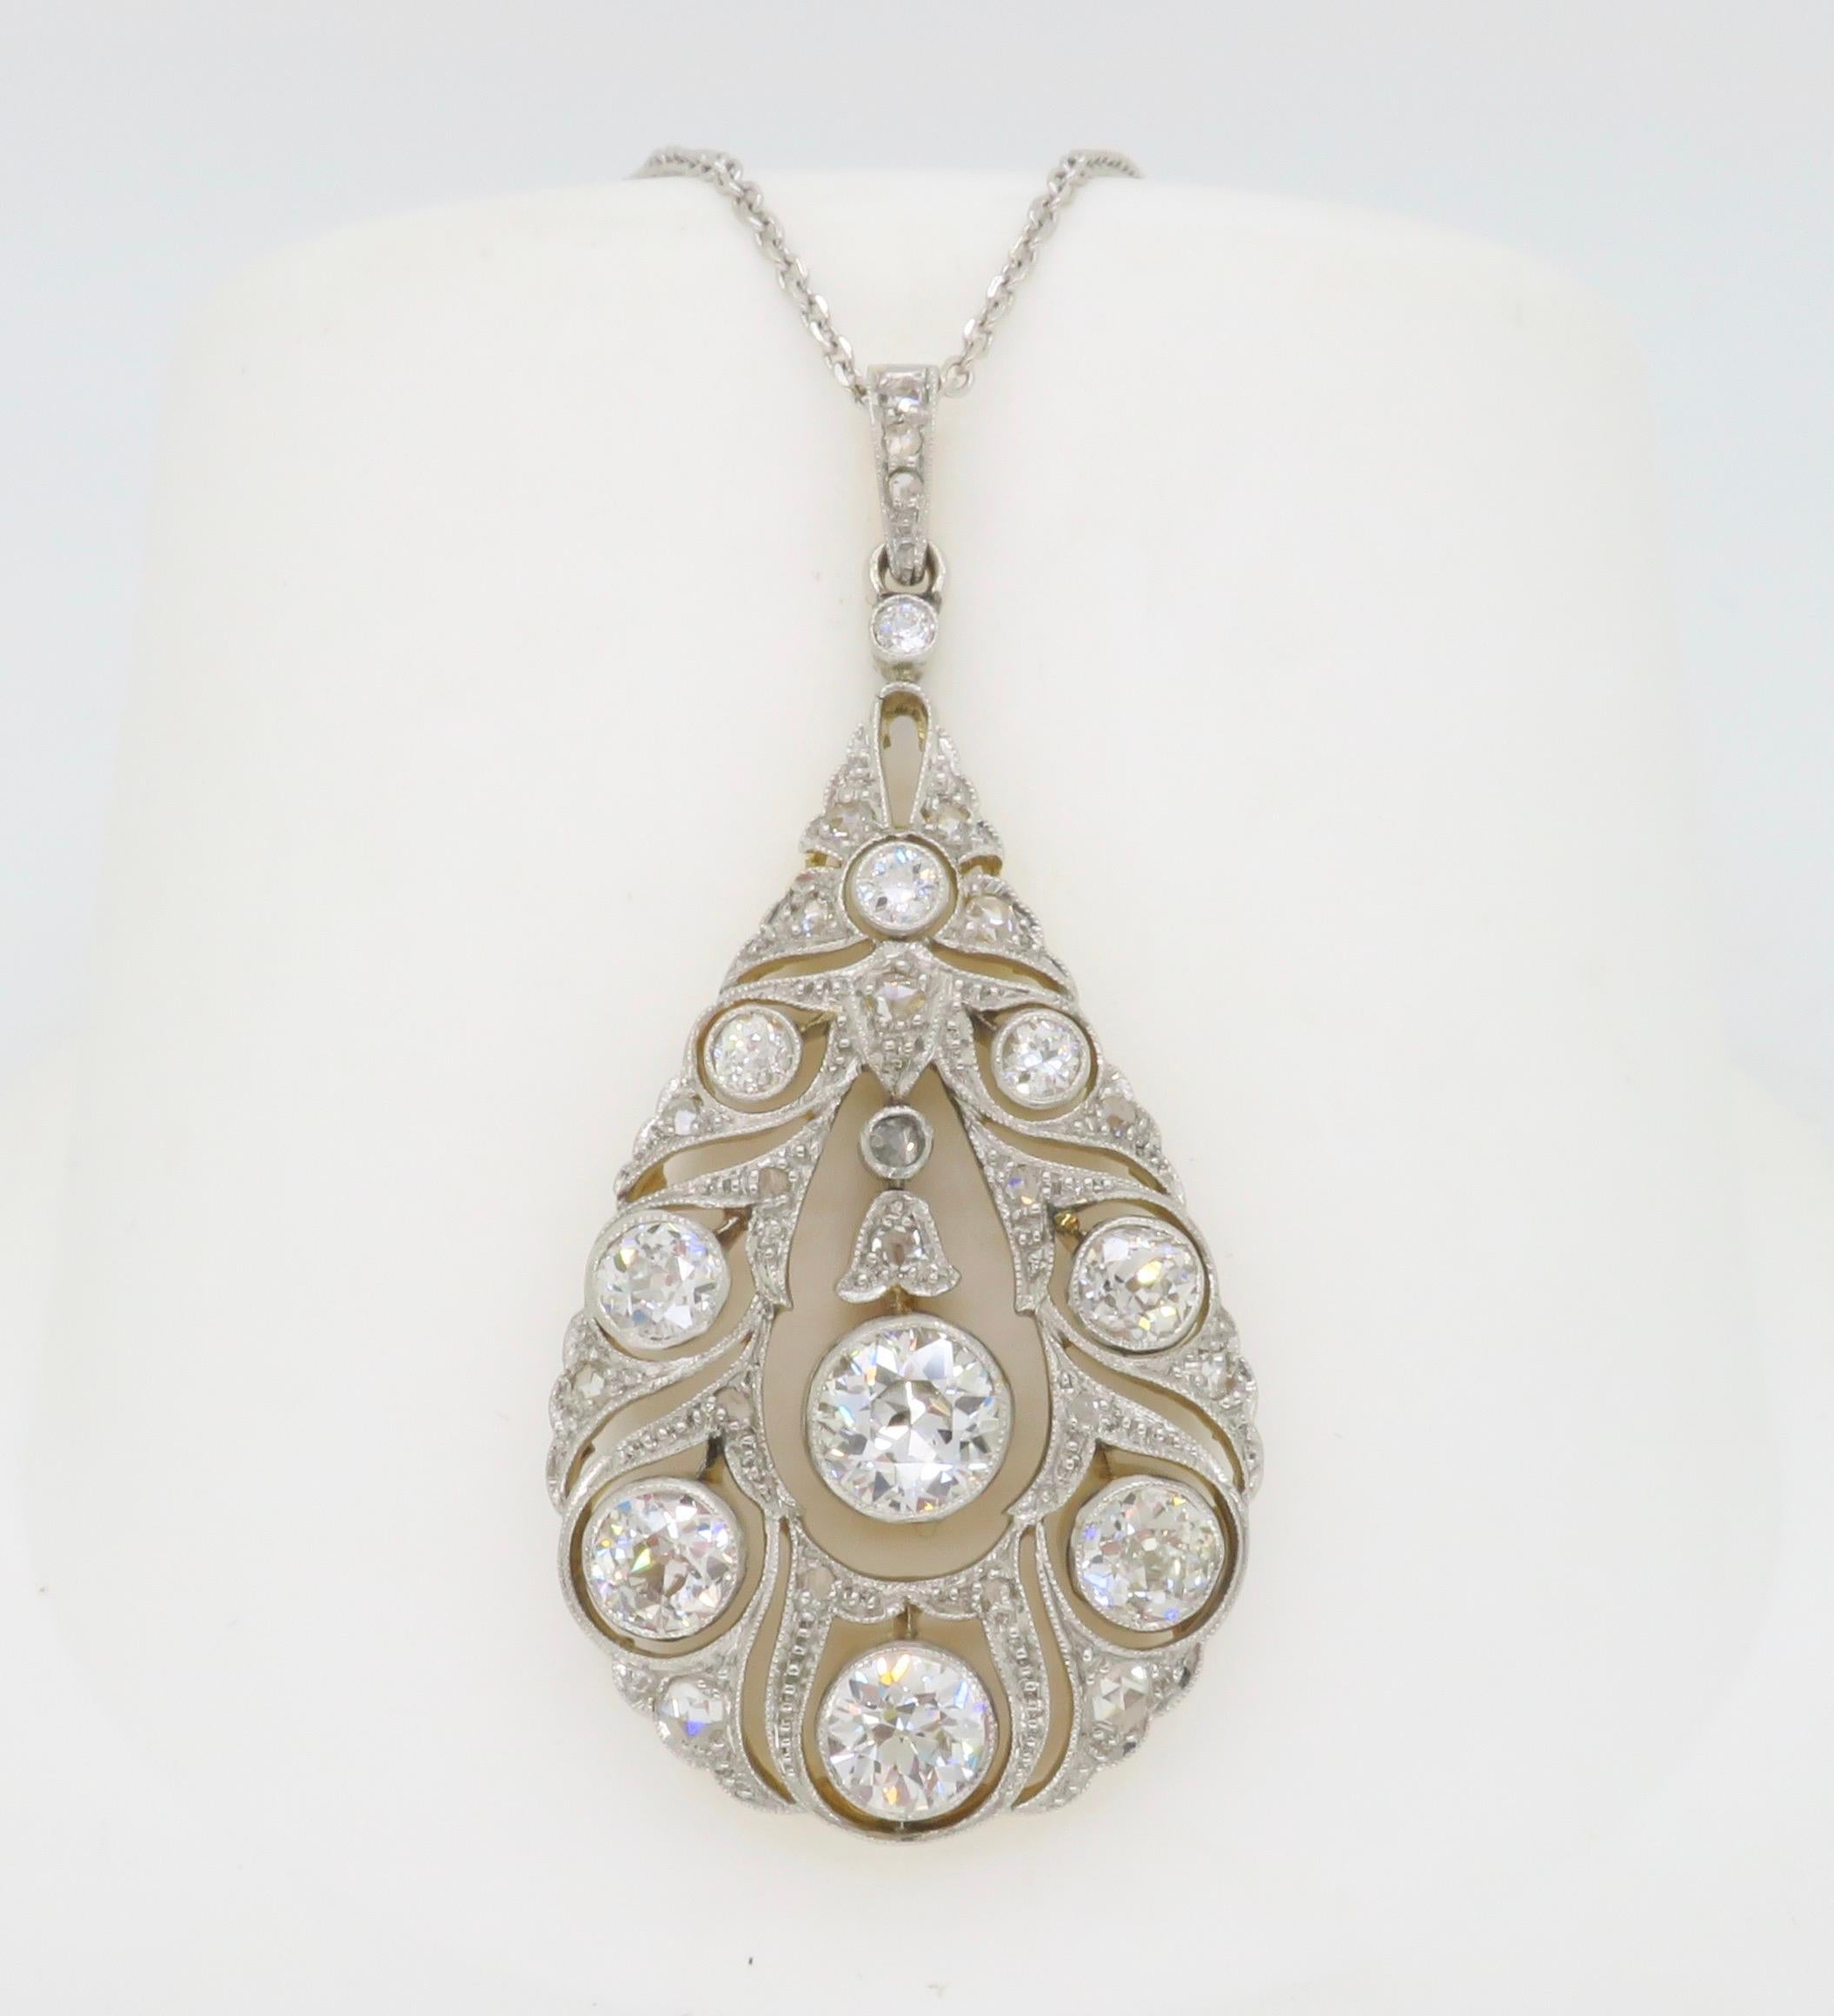 Diamond encrusted vintage pendant necklace made with 2.38CTW of diamonds. 

Total Diamond Carat Weight: Approximately 2.38CTW
Diamond Cut: Old European cut & Rose cut  
Color: Average H-J 
Clarity: Average SI
Center Diamond Carat Weight: